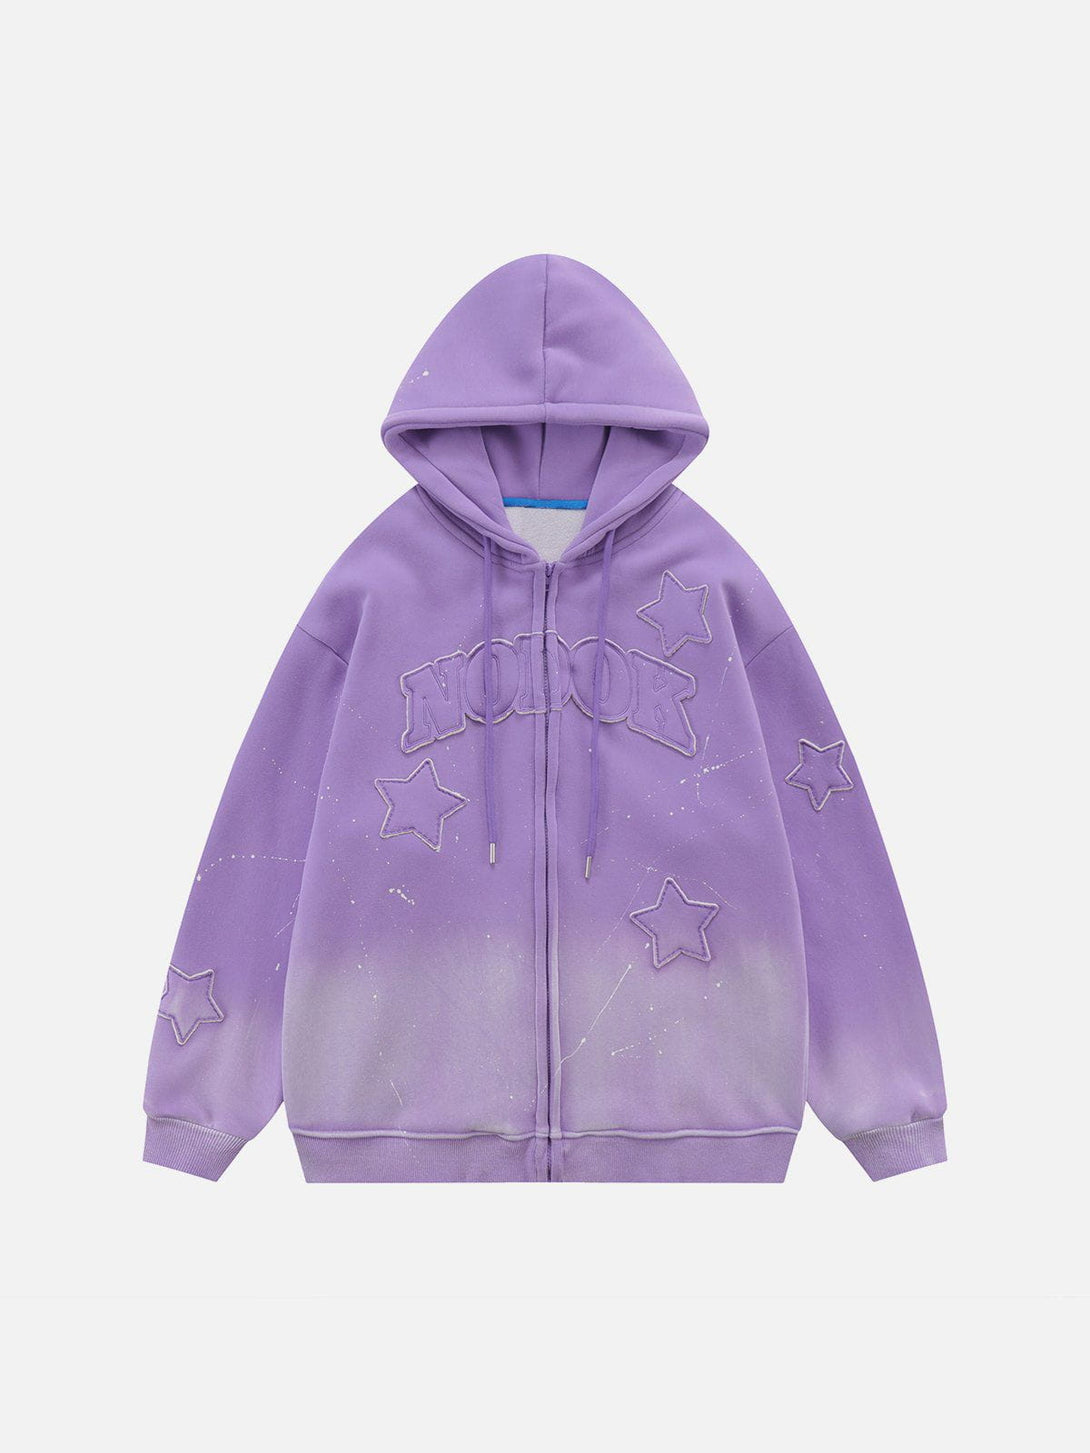 Levefly - Distressed Gradient Applique Stars Hoodie - Streetwear Fashion - levefly.com